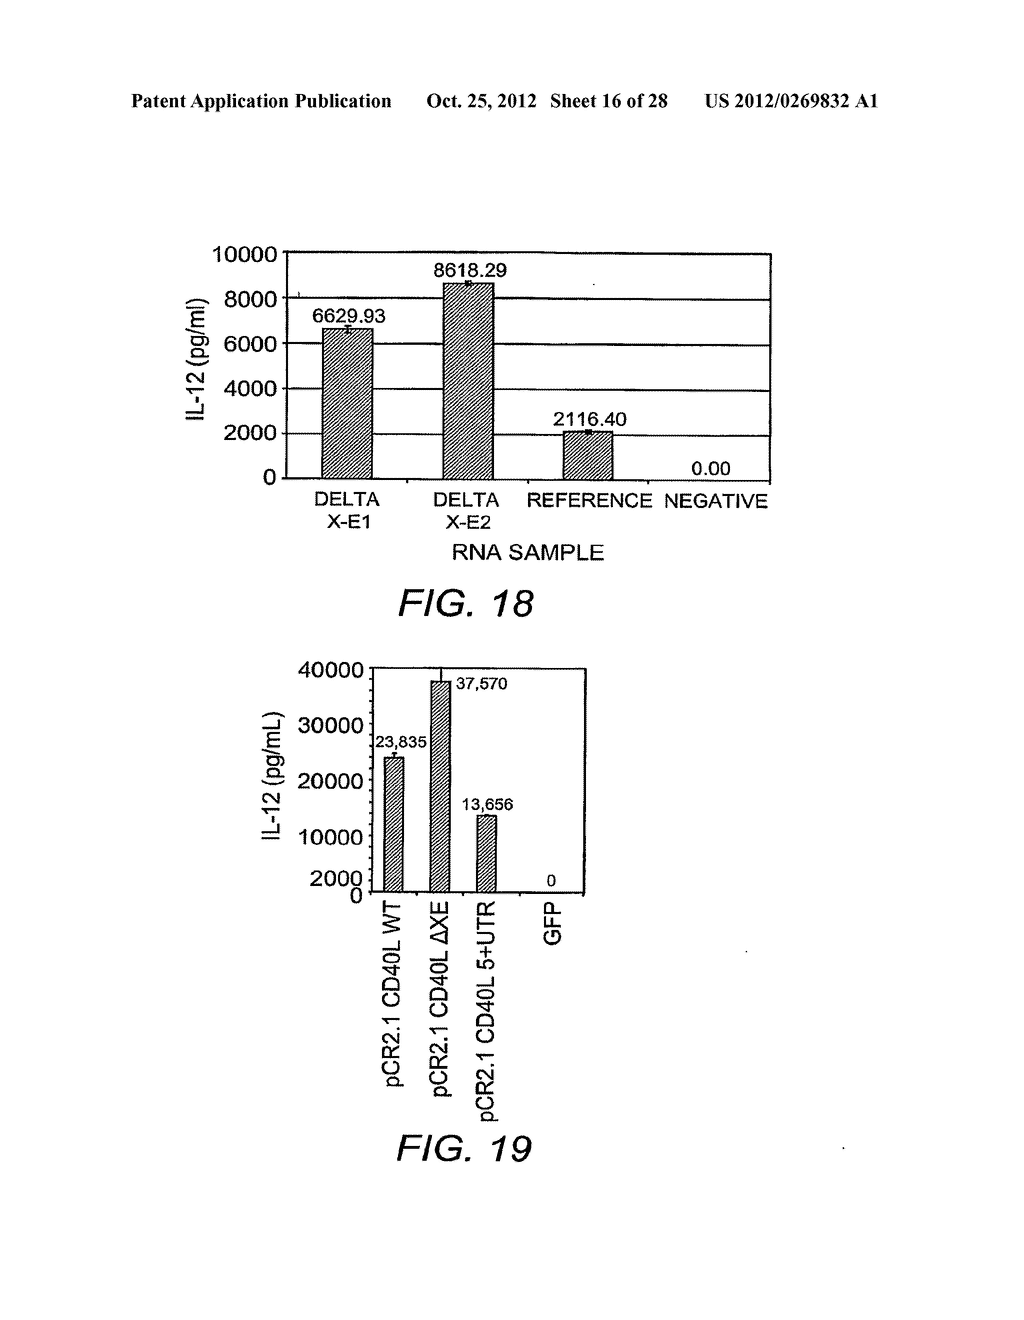 Mature Dendritic Cell Compositions and Methods of Culturing Same - diagram, schematic, and image 17